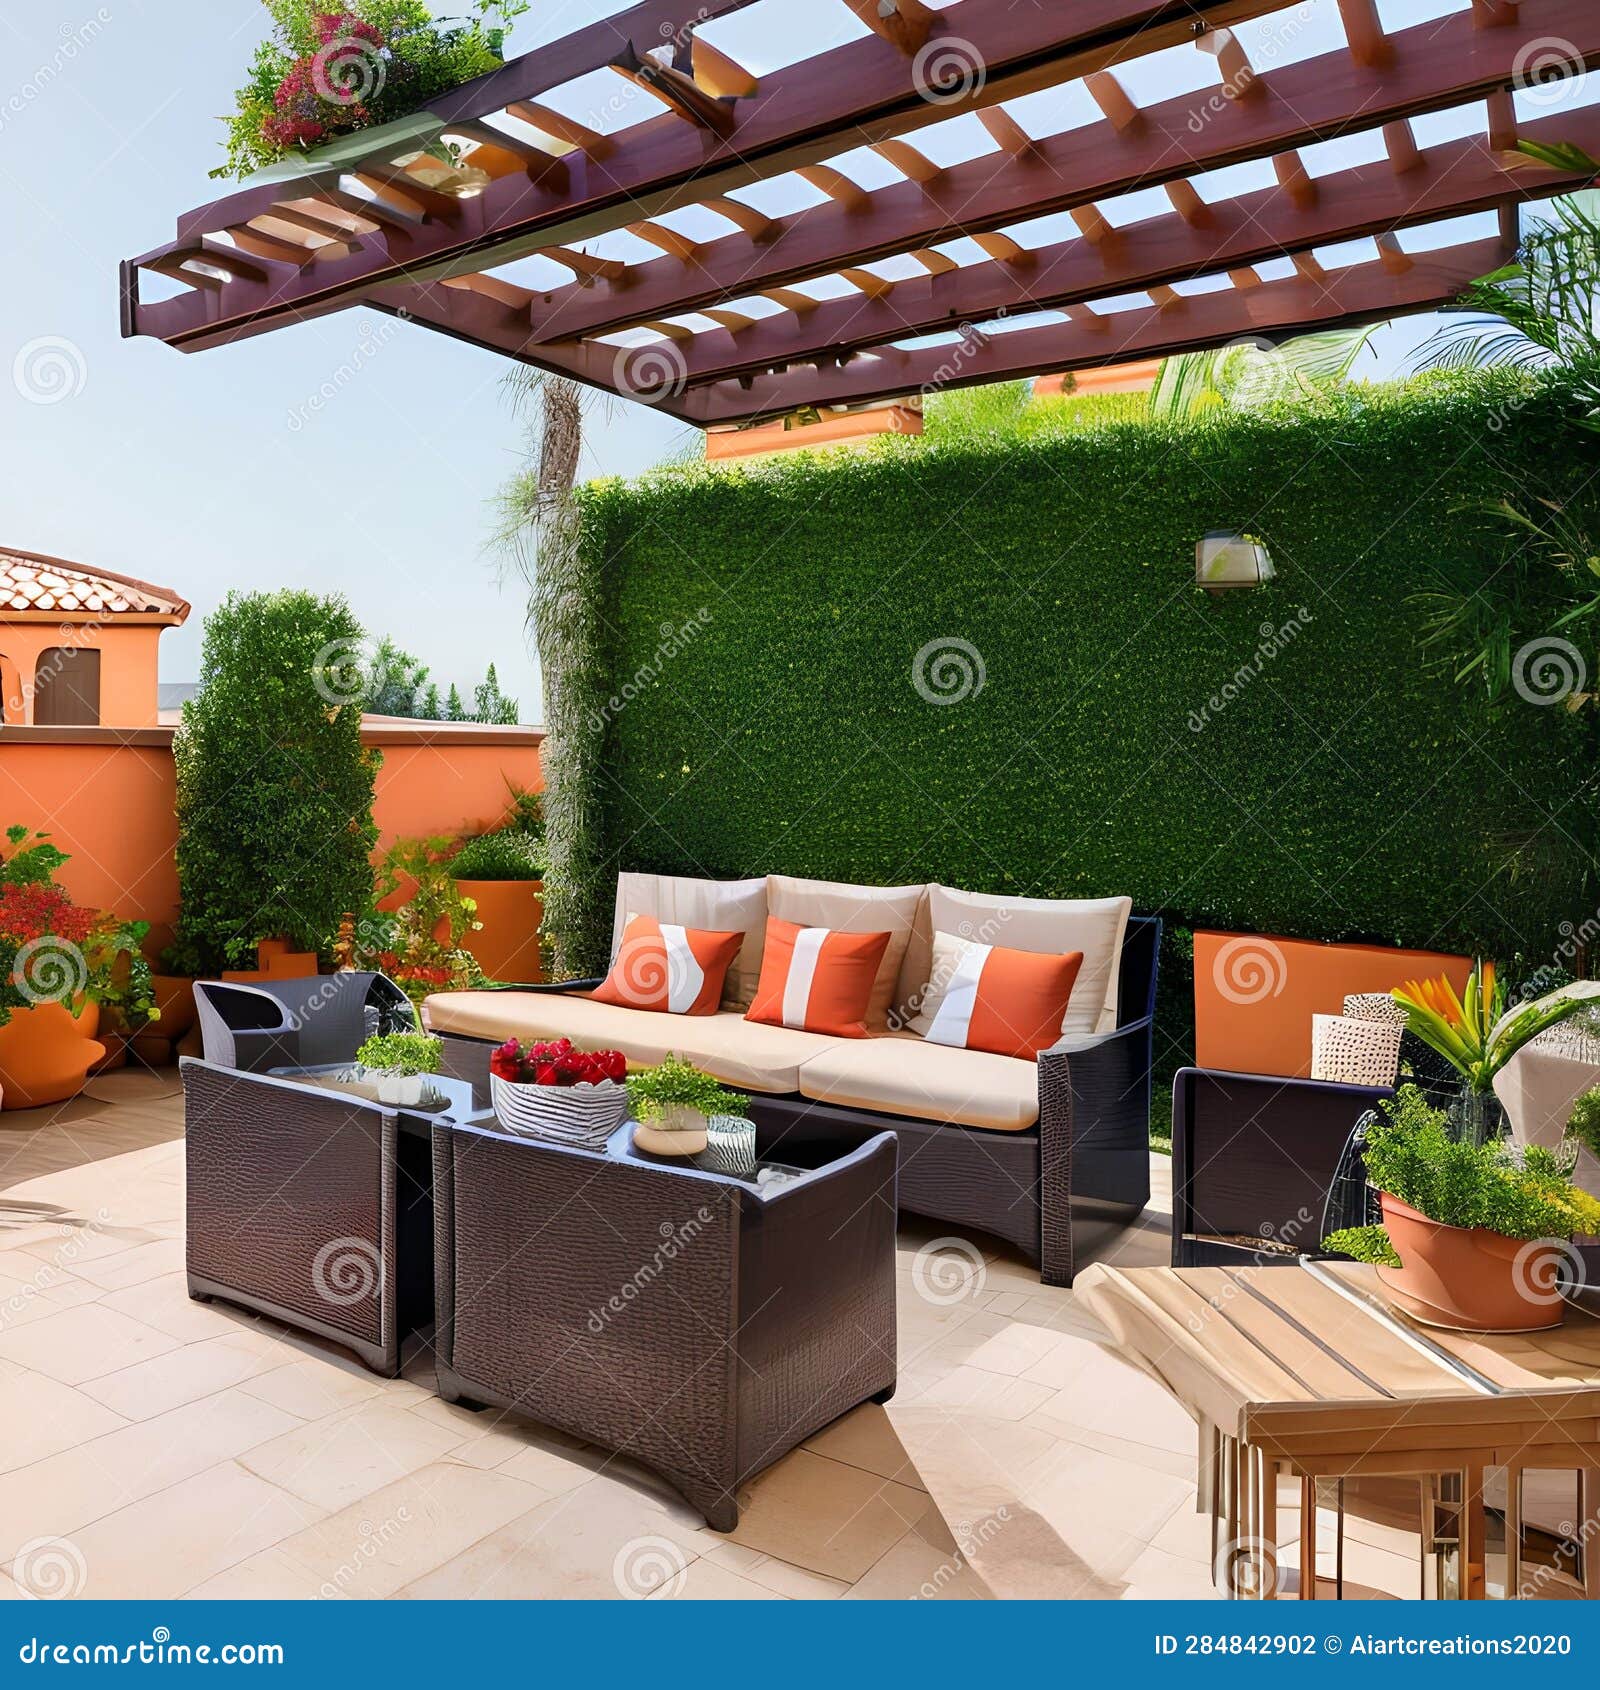 Mediterranean Getaway: a Sunny Terrace with Terracotta Tiles, Wrought ...